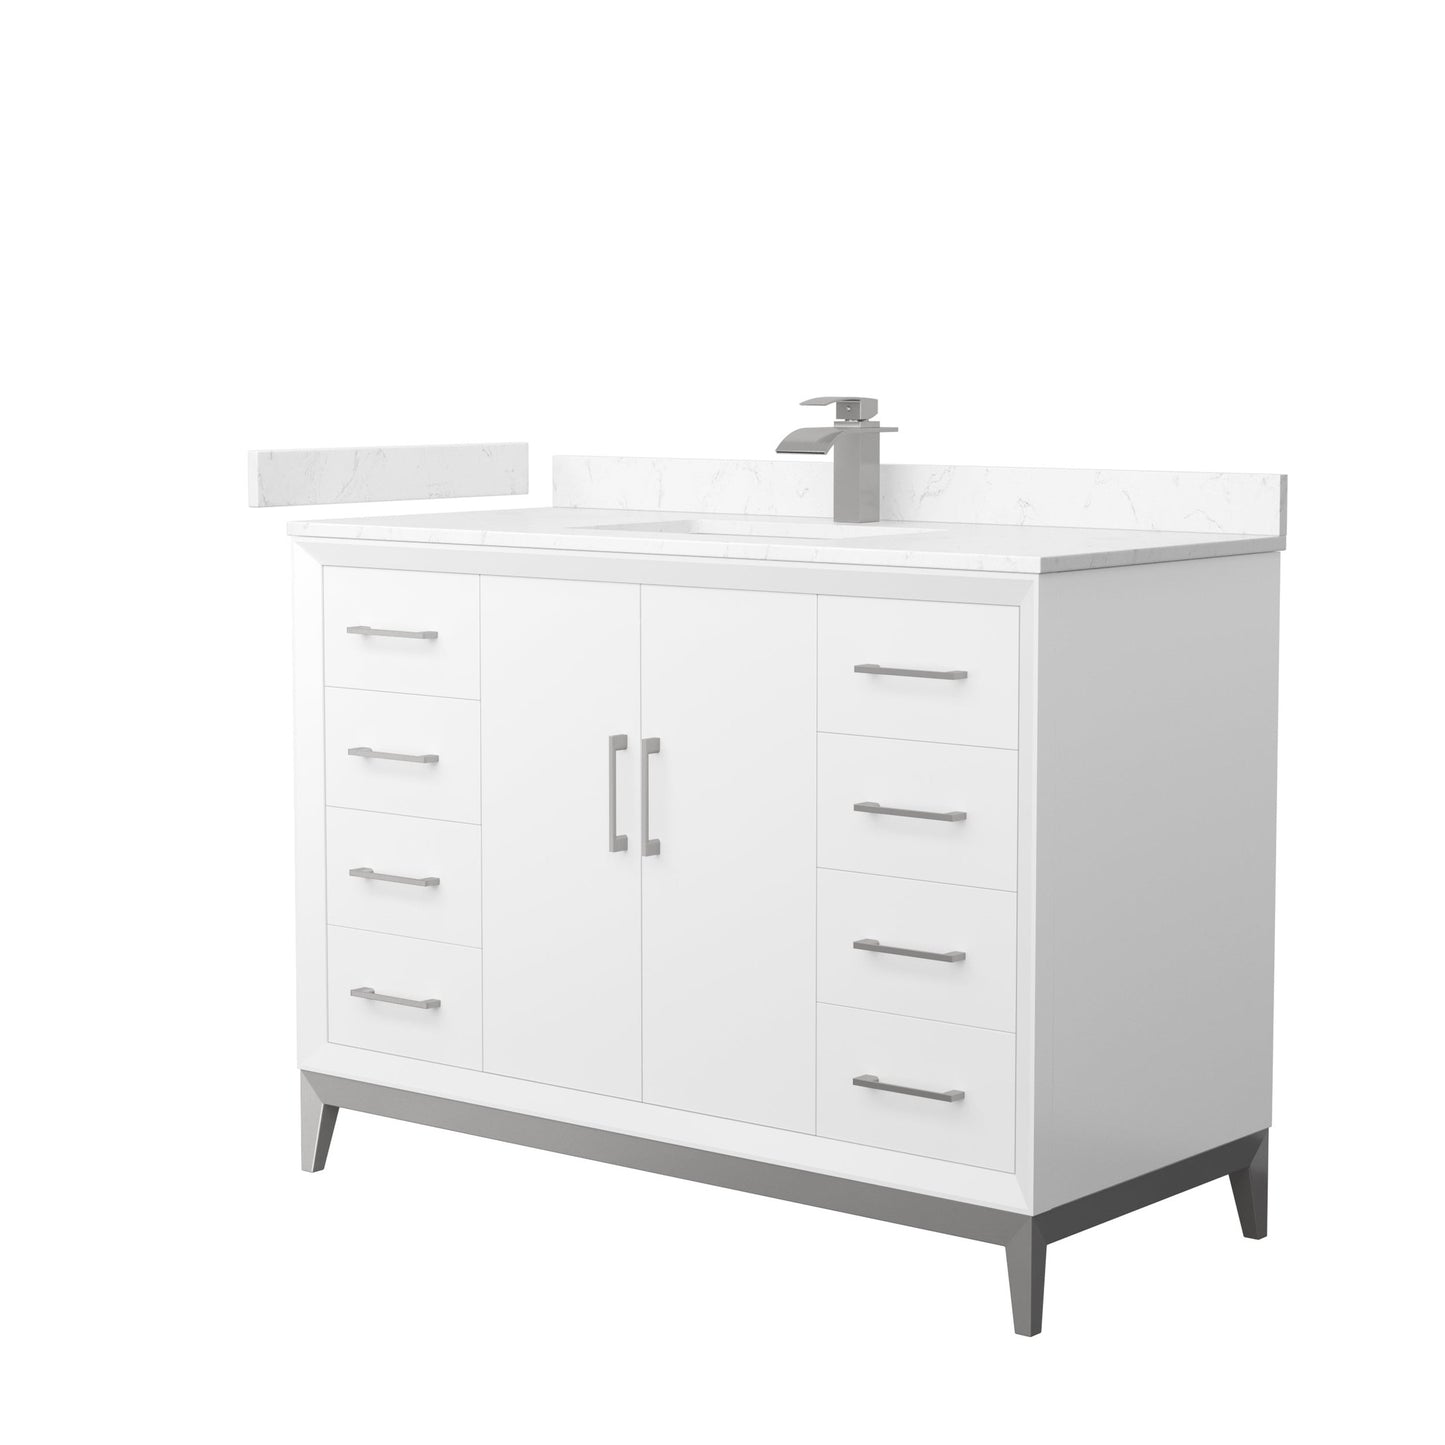 Wyndham Collection Amici 48" Single Bathroom Vanity in White, Carrara Cultured Marble Countertop, Undermount Square Sink, Brushed Nickel Trim